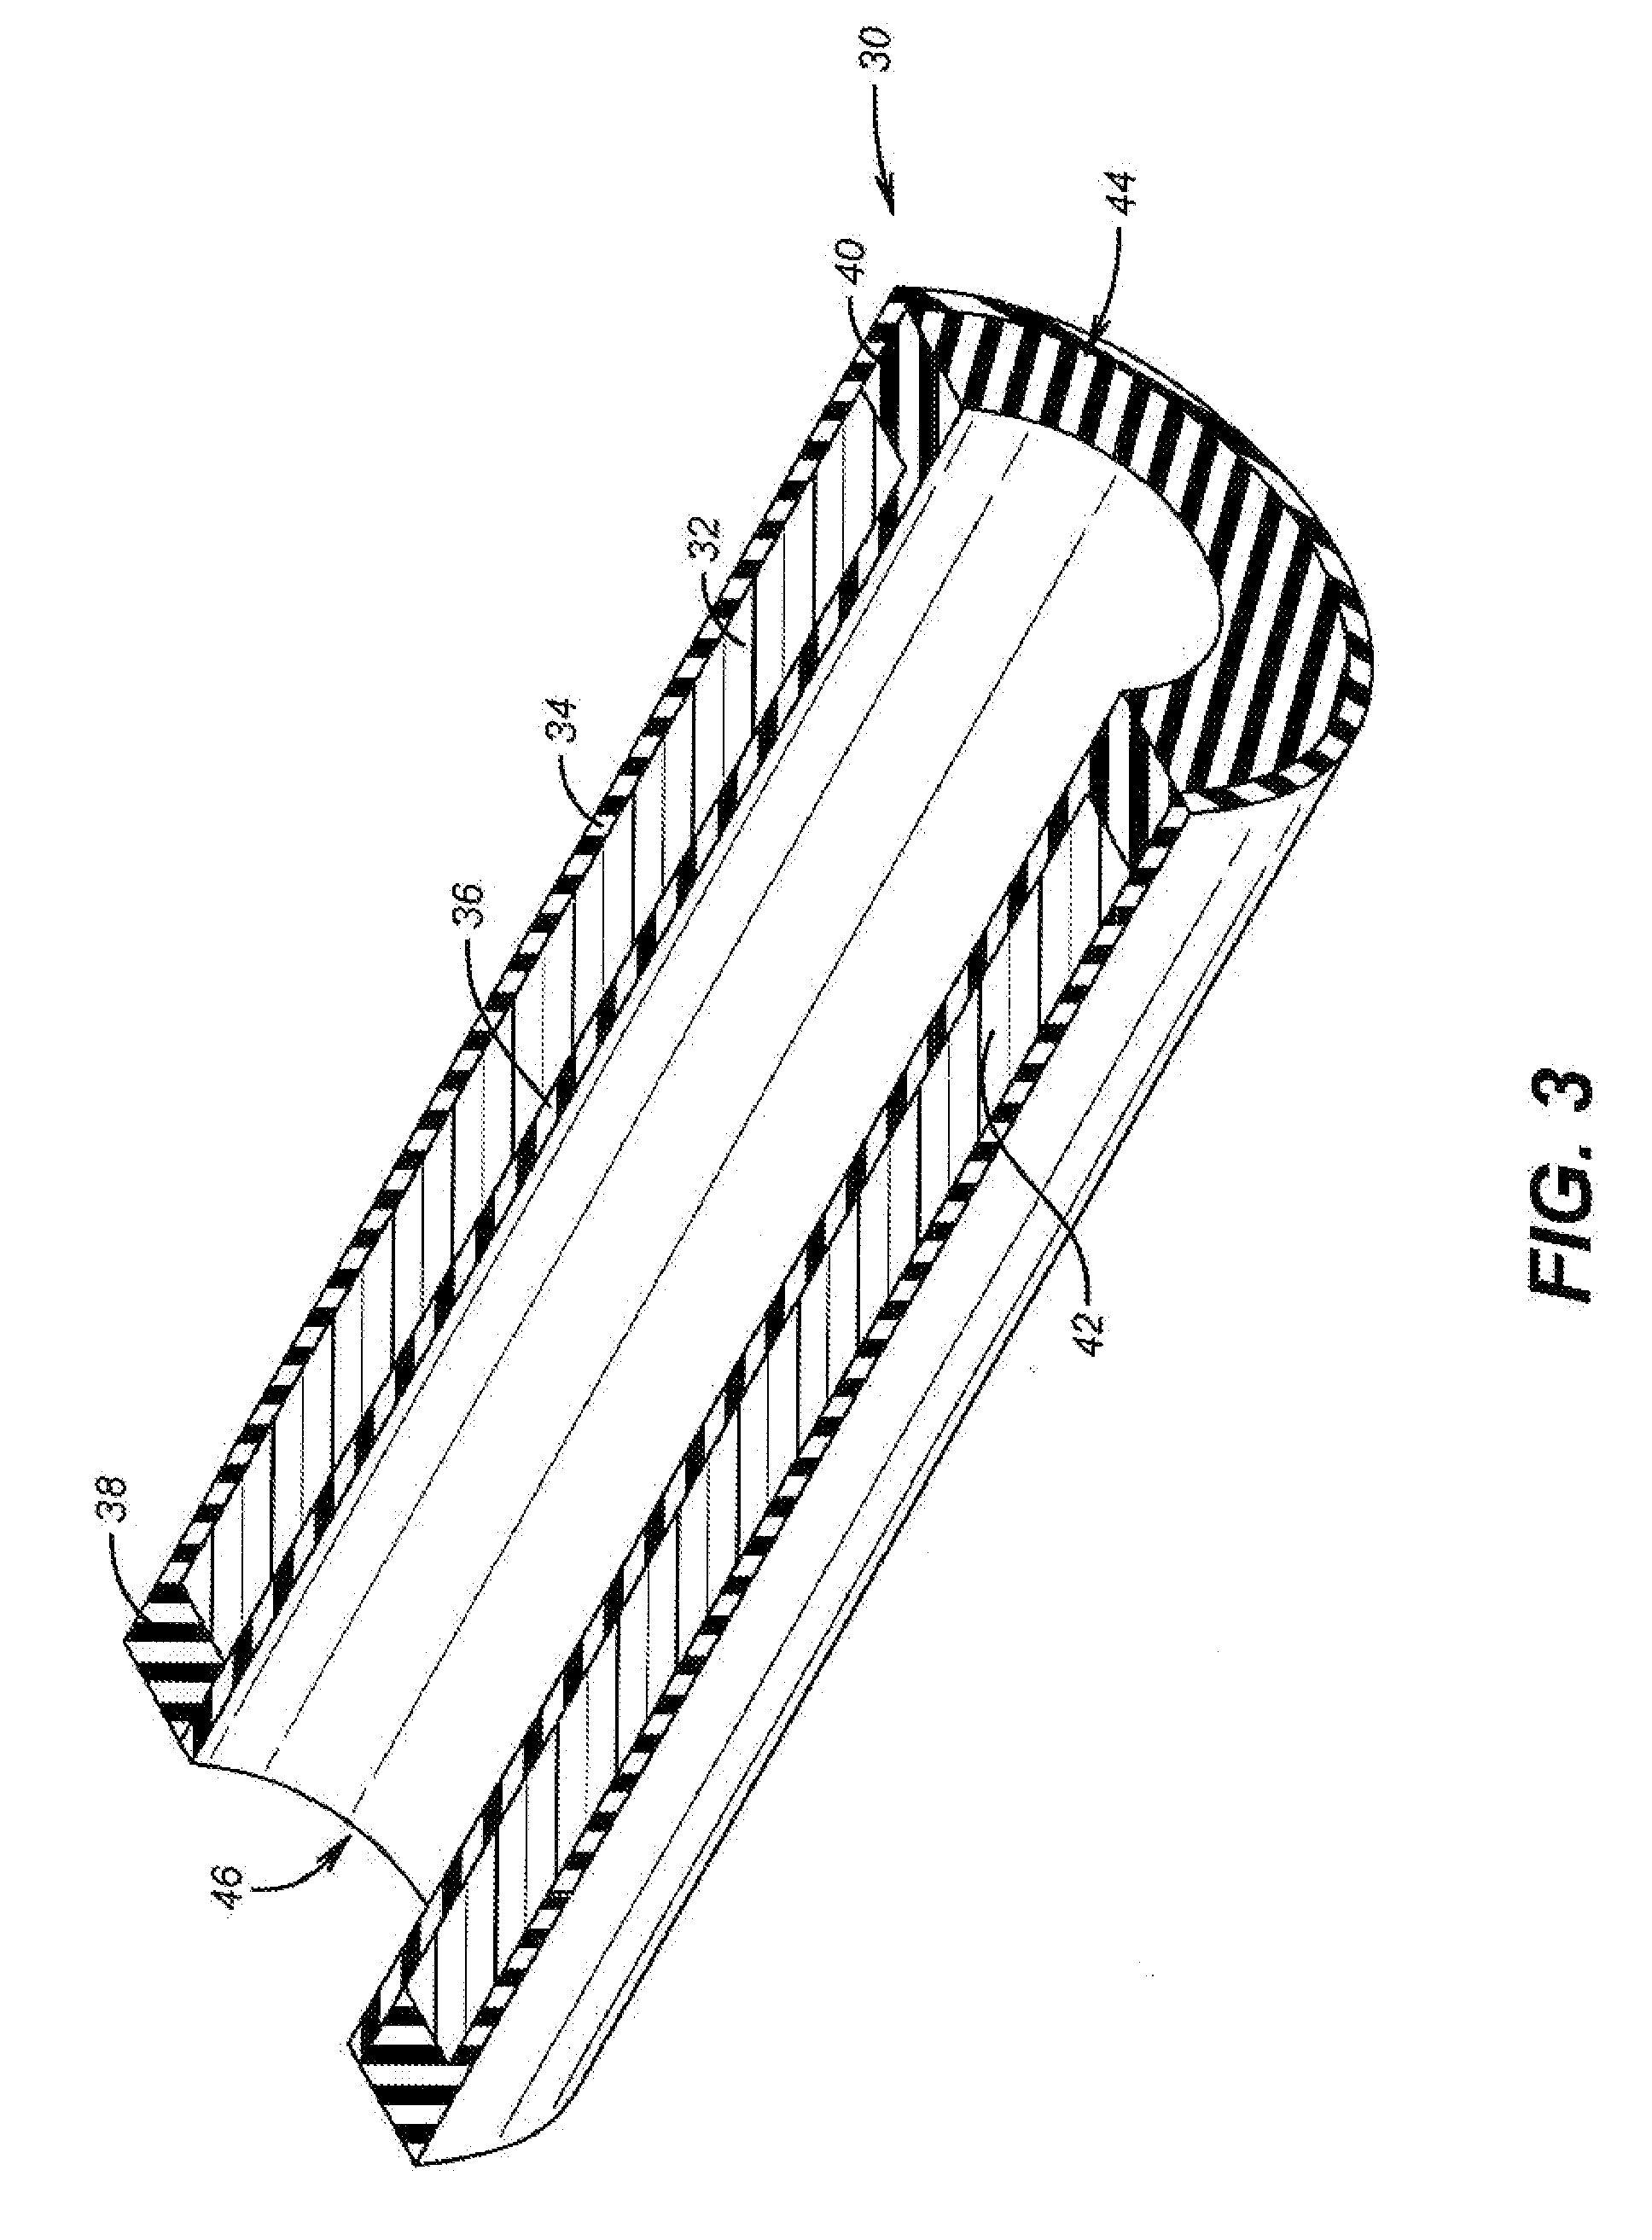 Packer sealing element with shape memory material